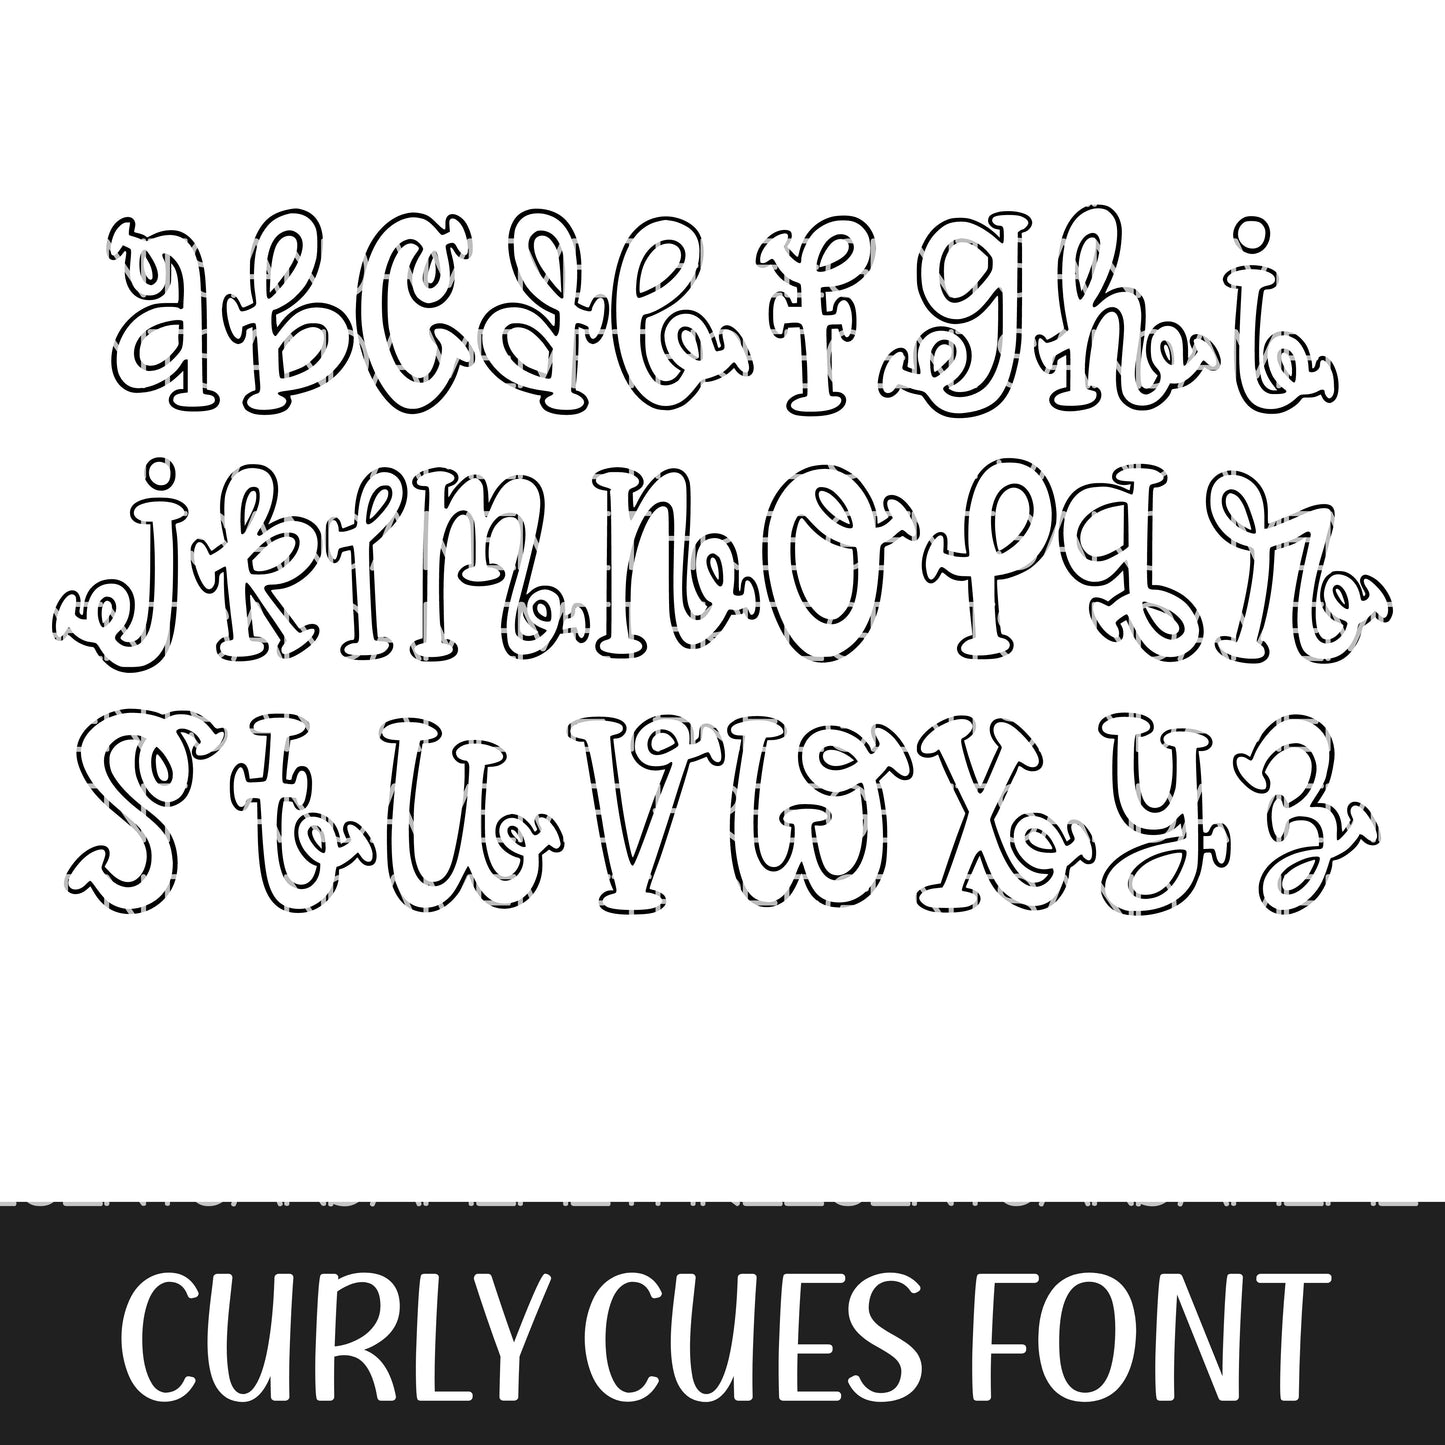 CURLY CUES FONT